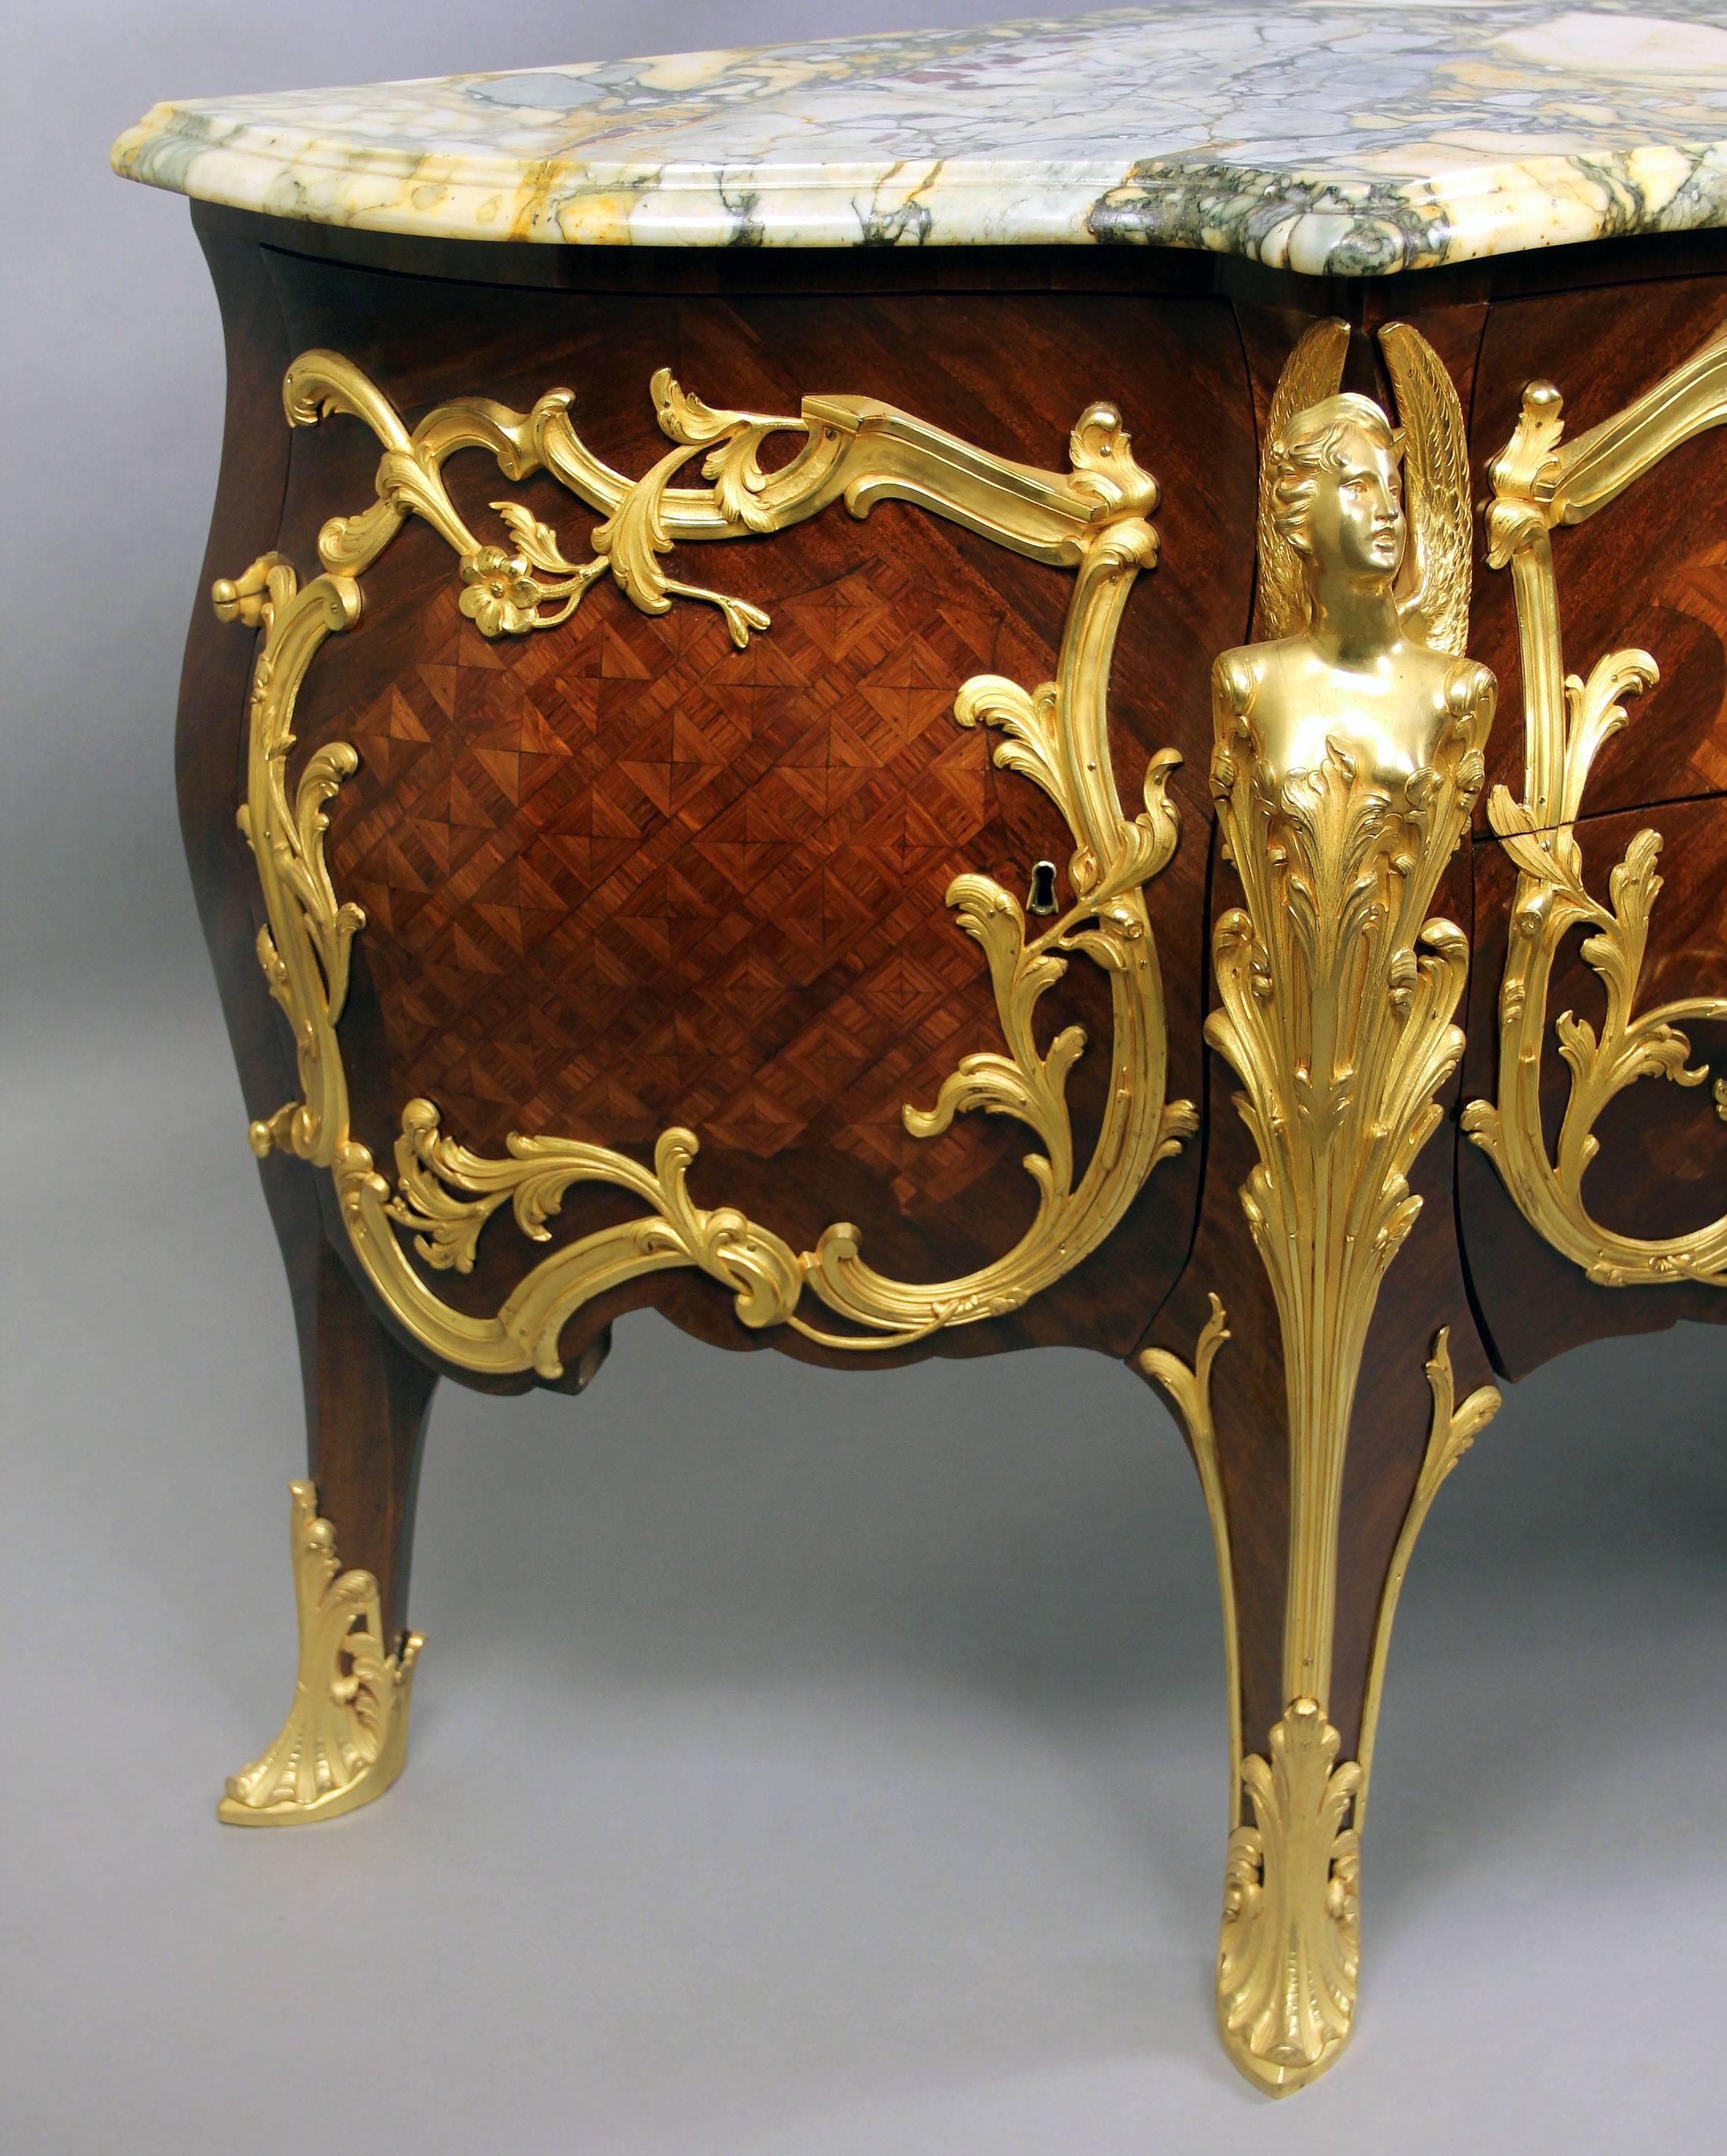 A lovely late 19th century Louis XV style gilt bronze-mounted and parquetry inlaid commode.

Surmounted by a serpentine veined marble top, the conforming case of bombe outline fitted with deep drawers flanked by winged caryatids and enclosed